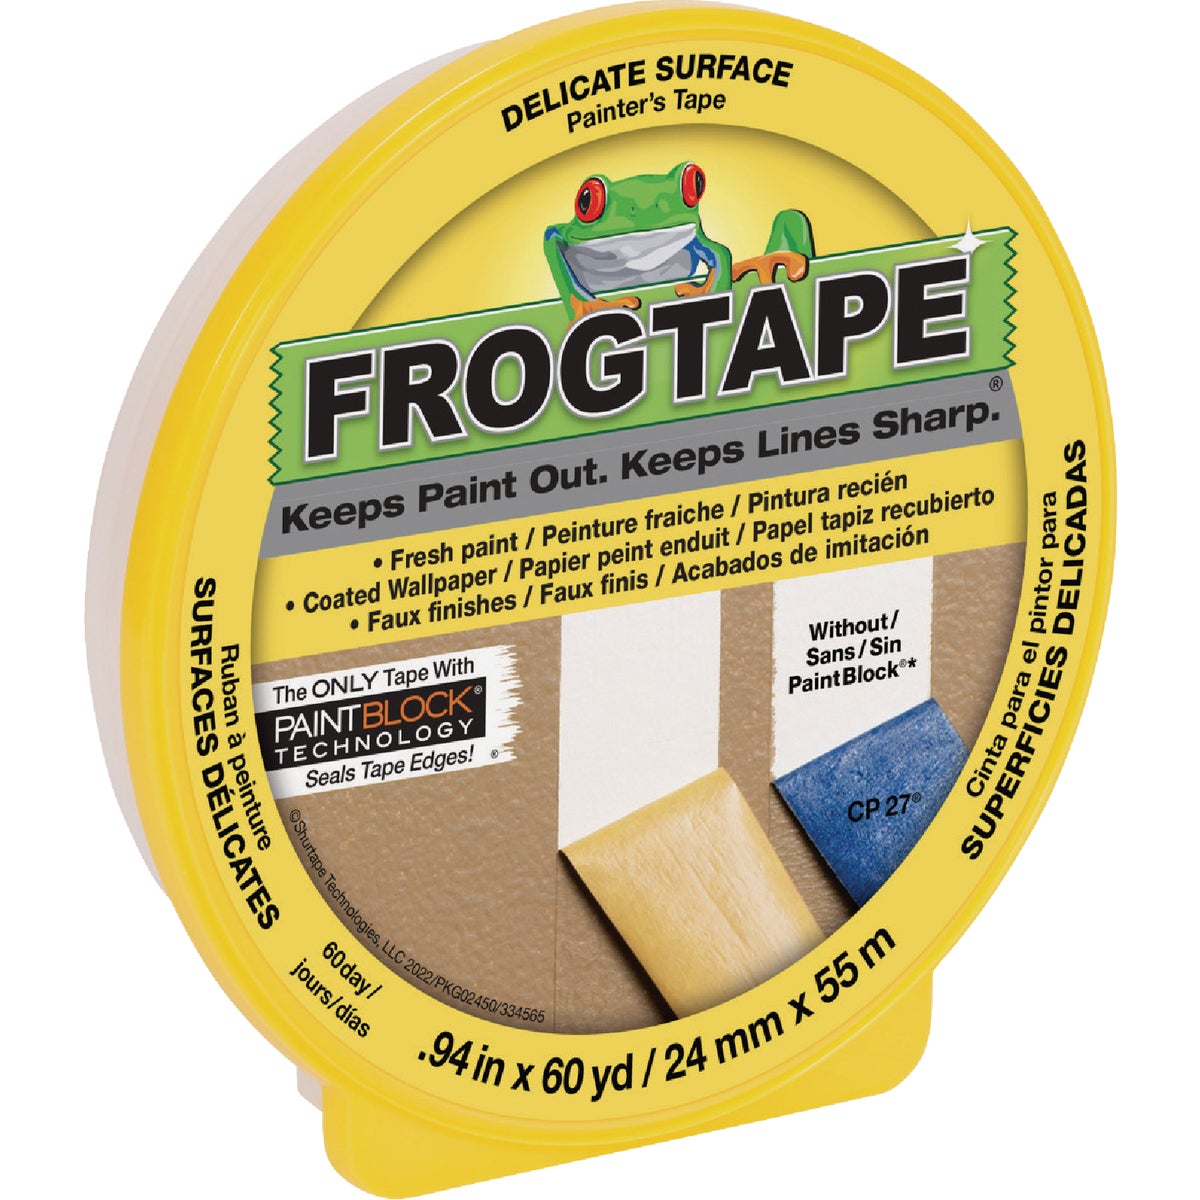 Item 789042, FrogTape delicate surface is a premium, light adhesion painter's masking 